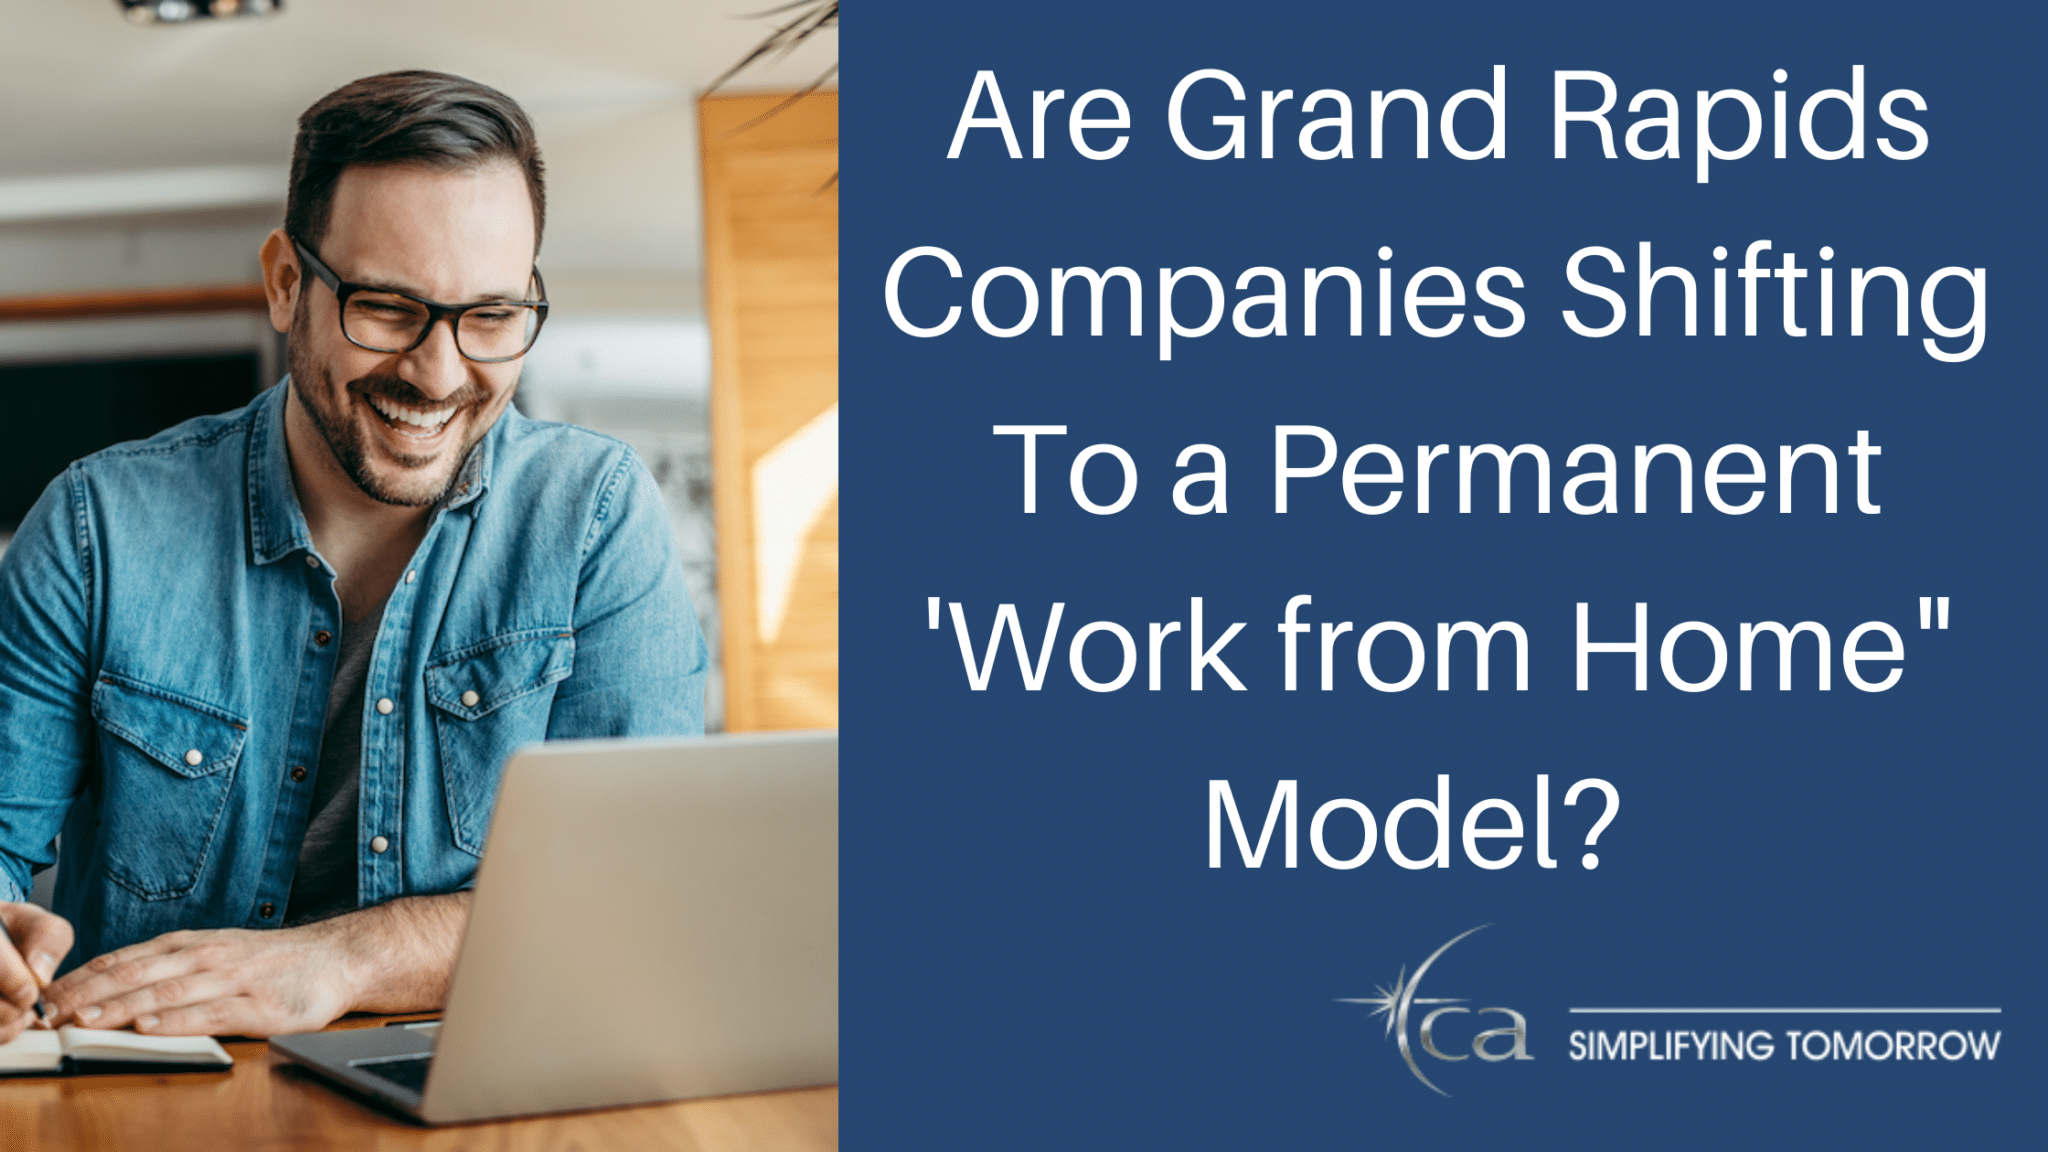 Are Grand Rapids Companies Shifting To a Permanent 'Work from Home" Model?